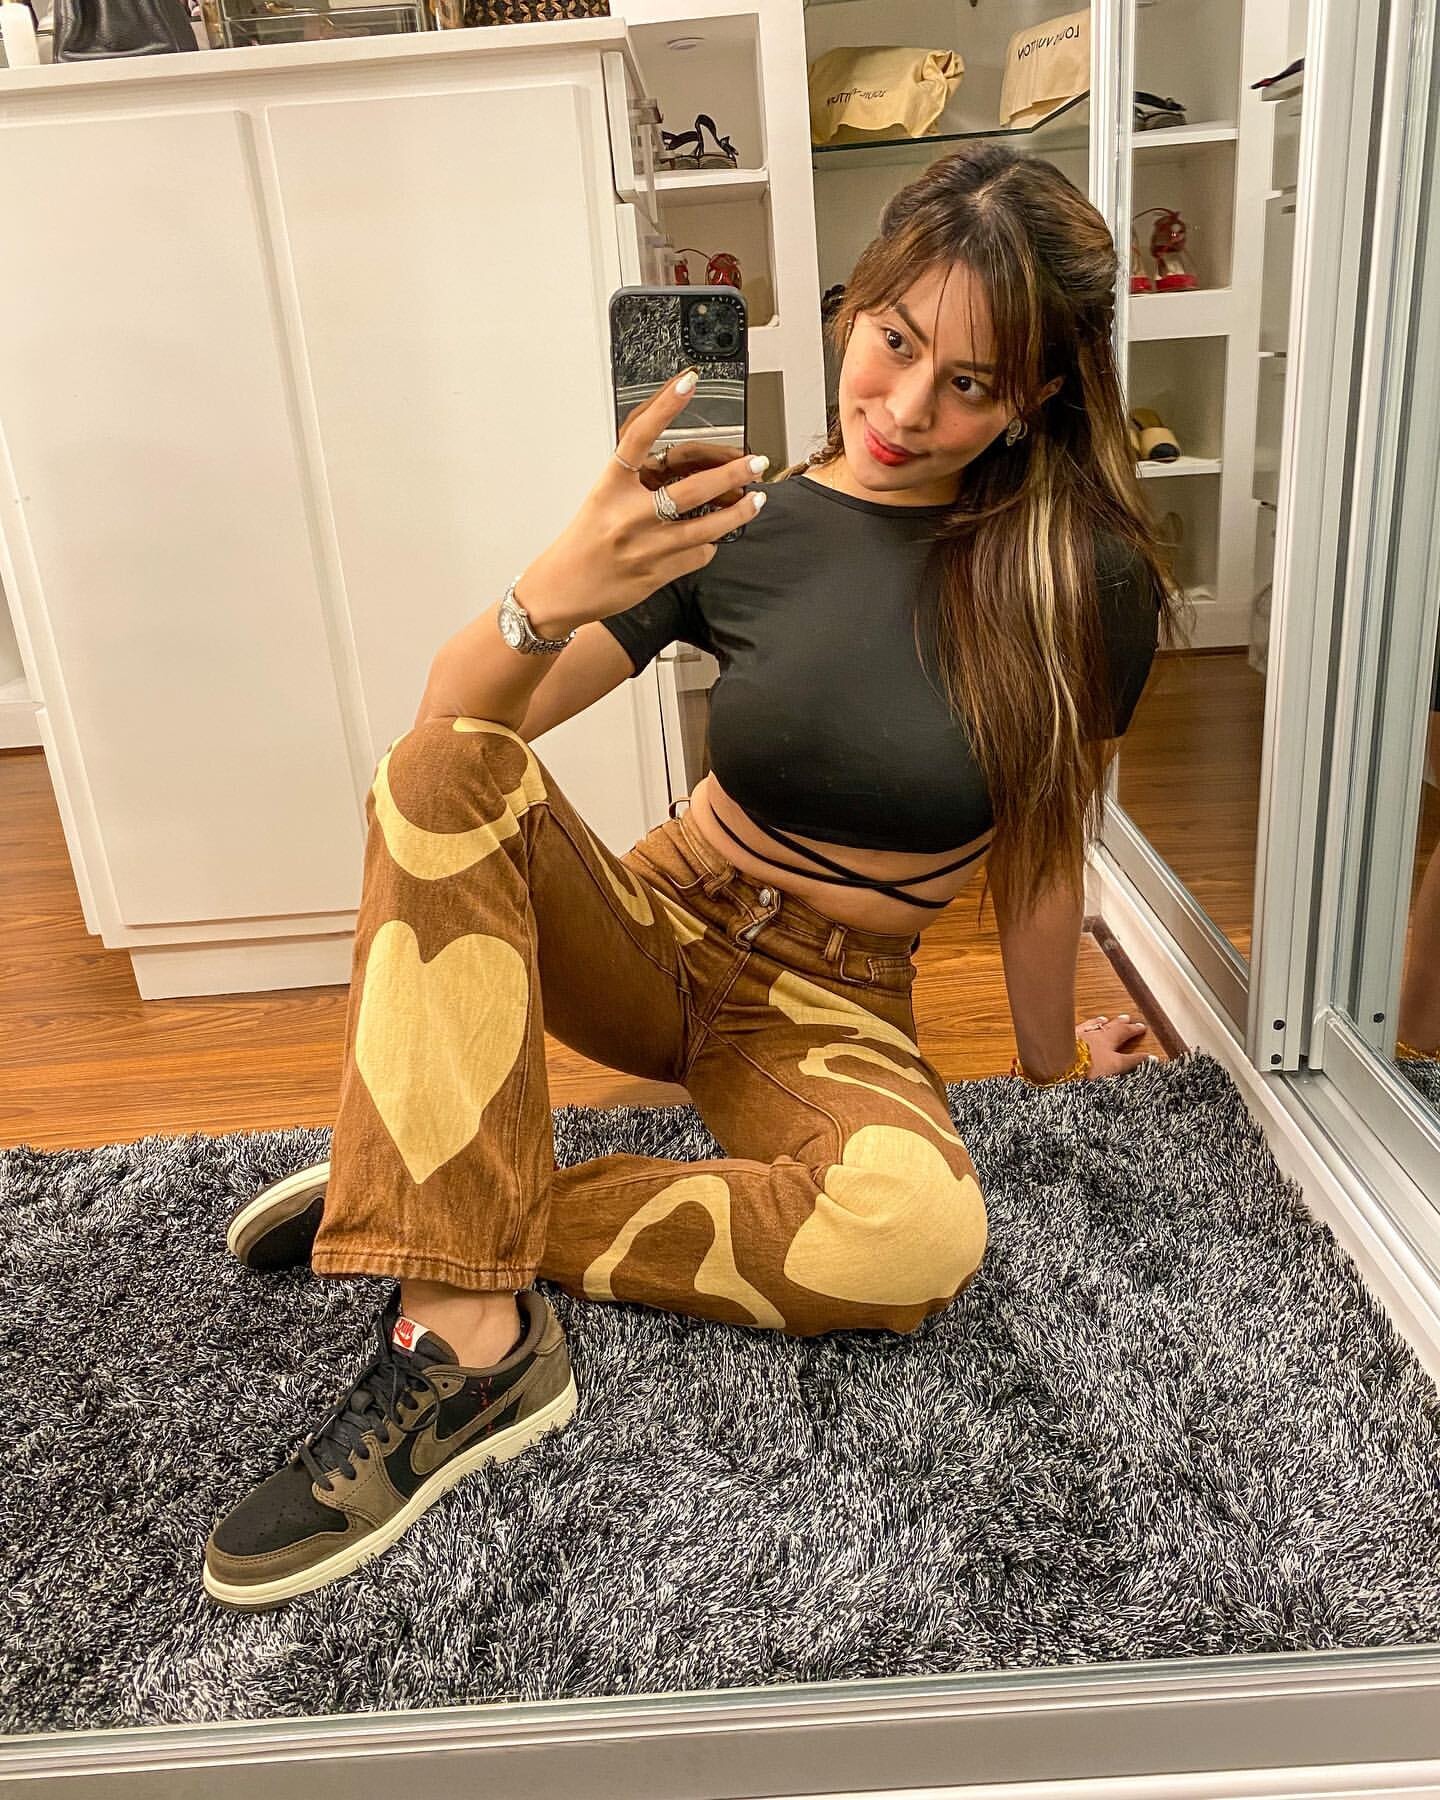 Maica Criselle Palo is taking selfie with her iPhone in her Home